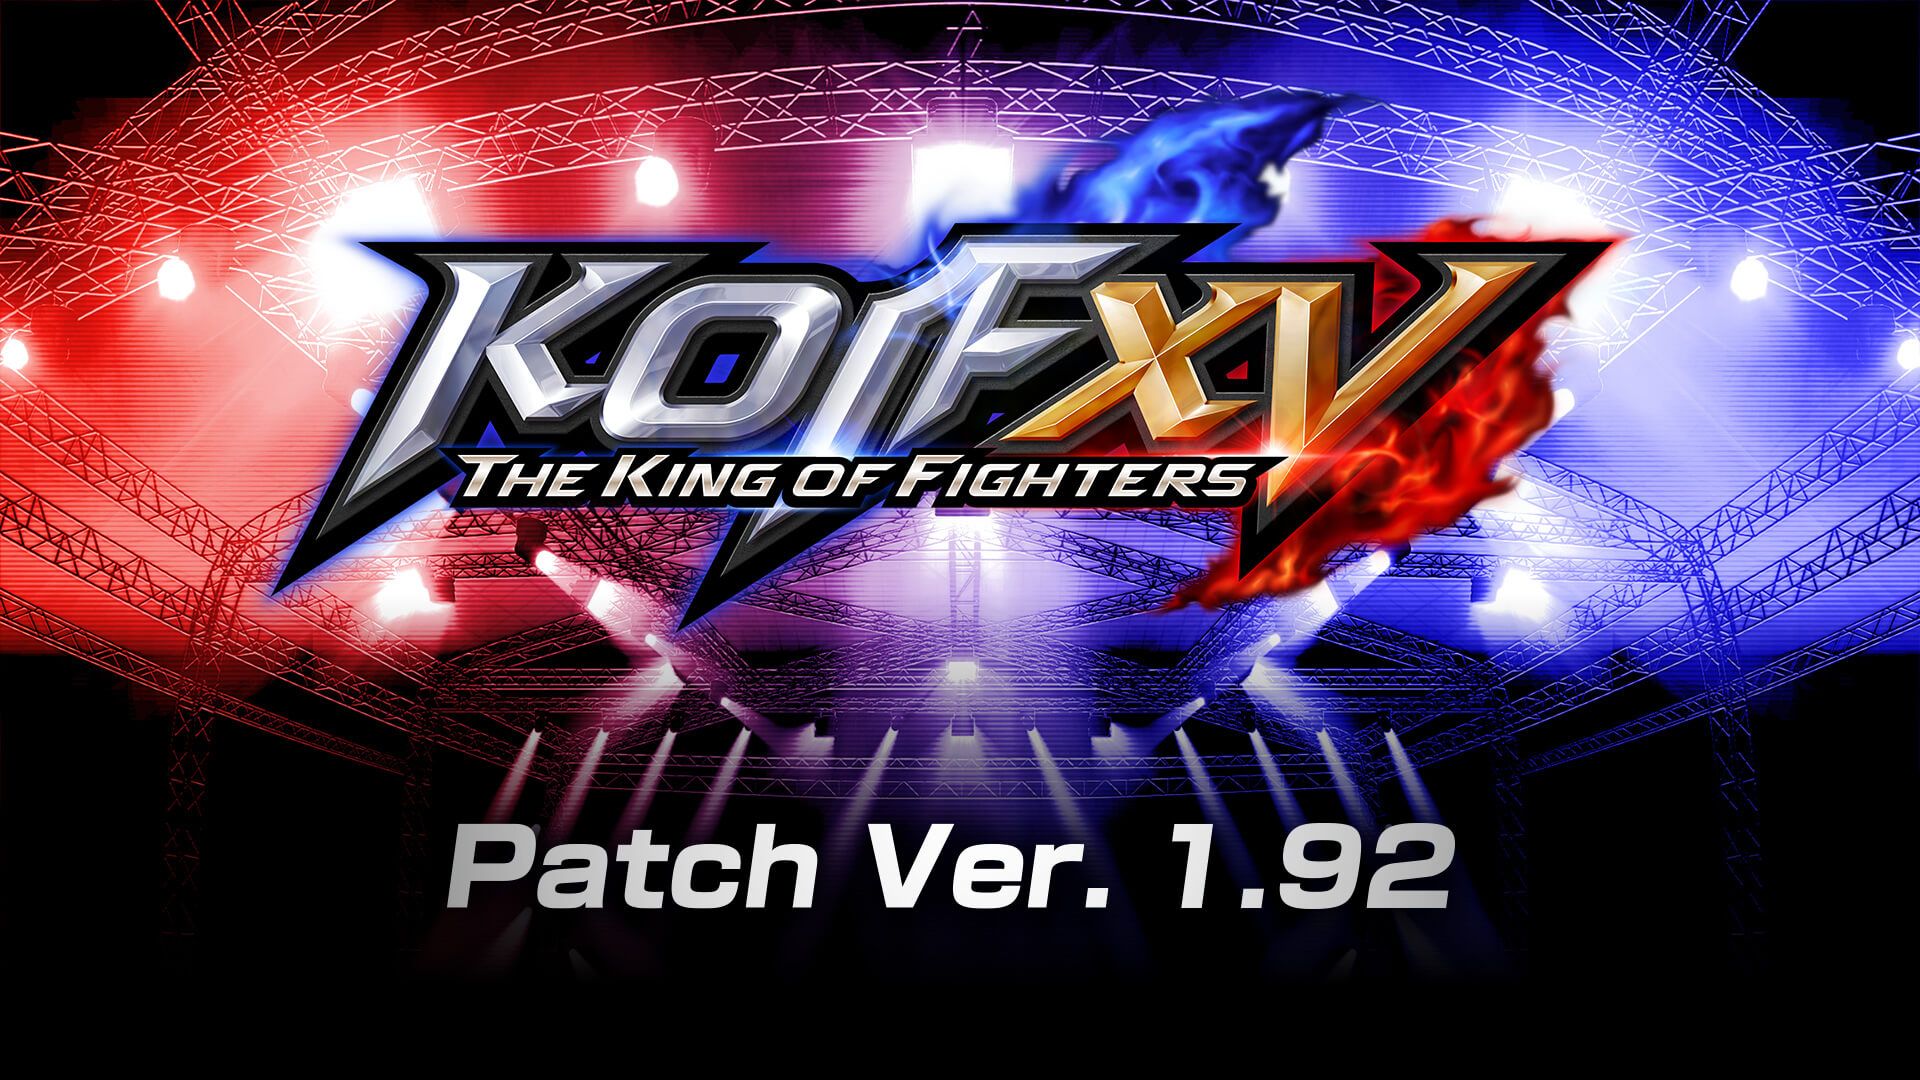 The King of Fighters XV Version 1.92 Patch Notes